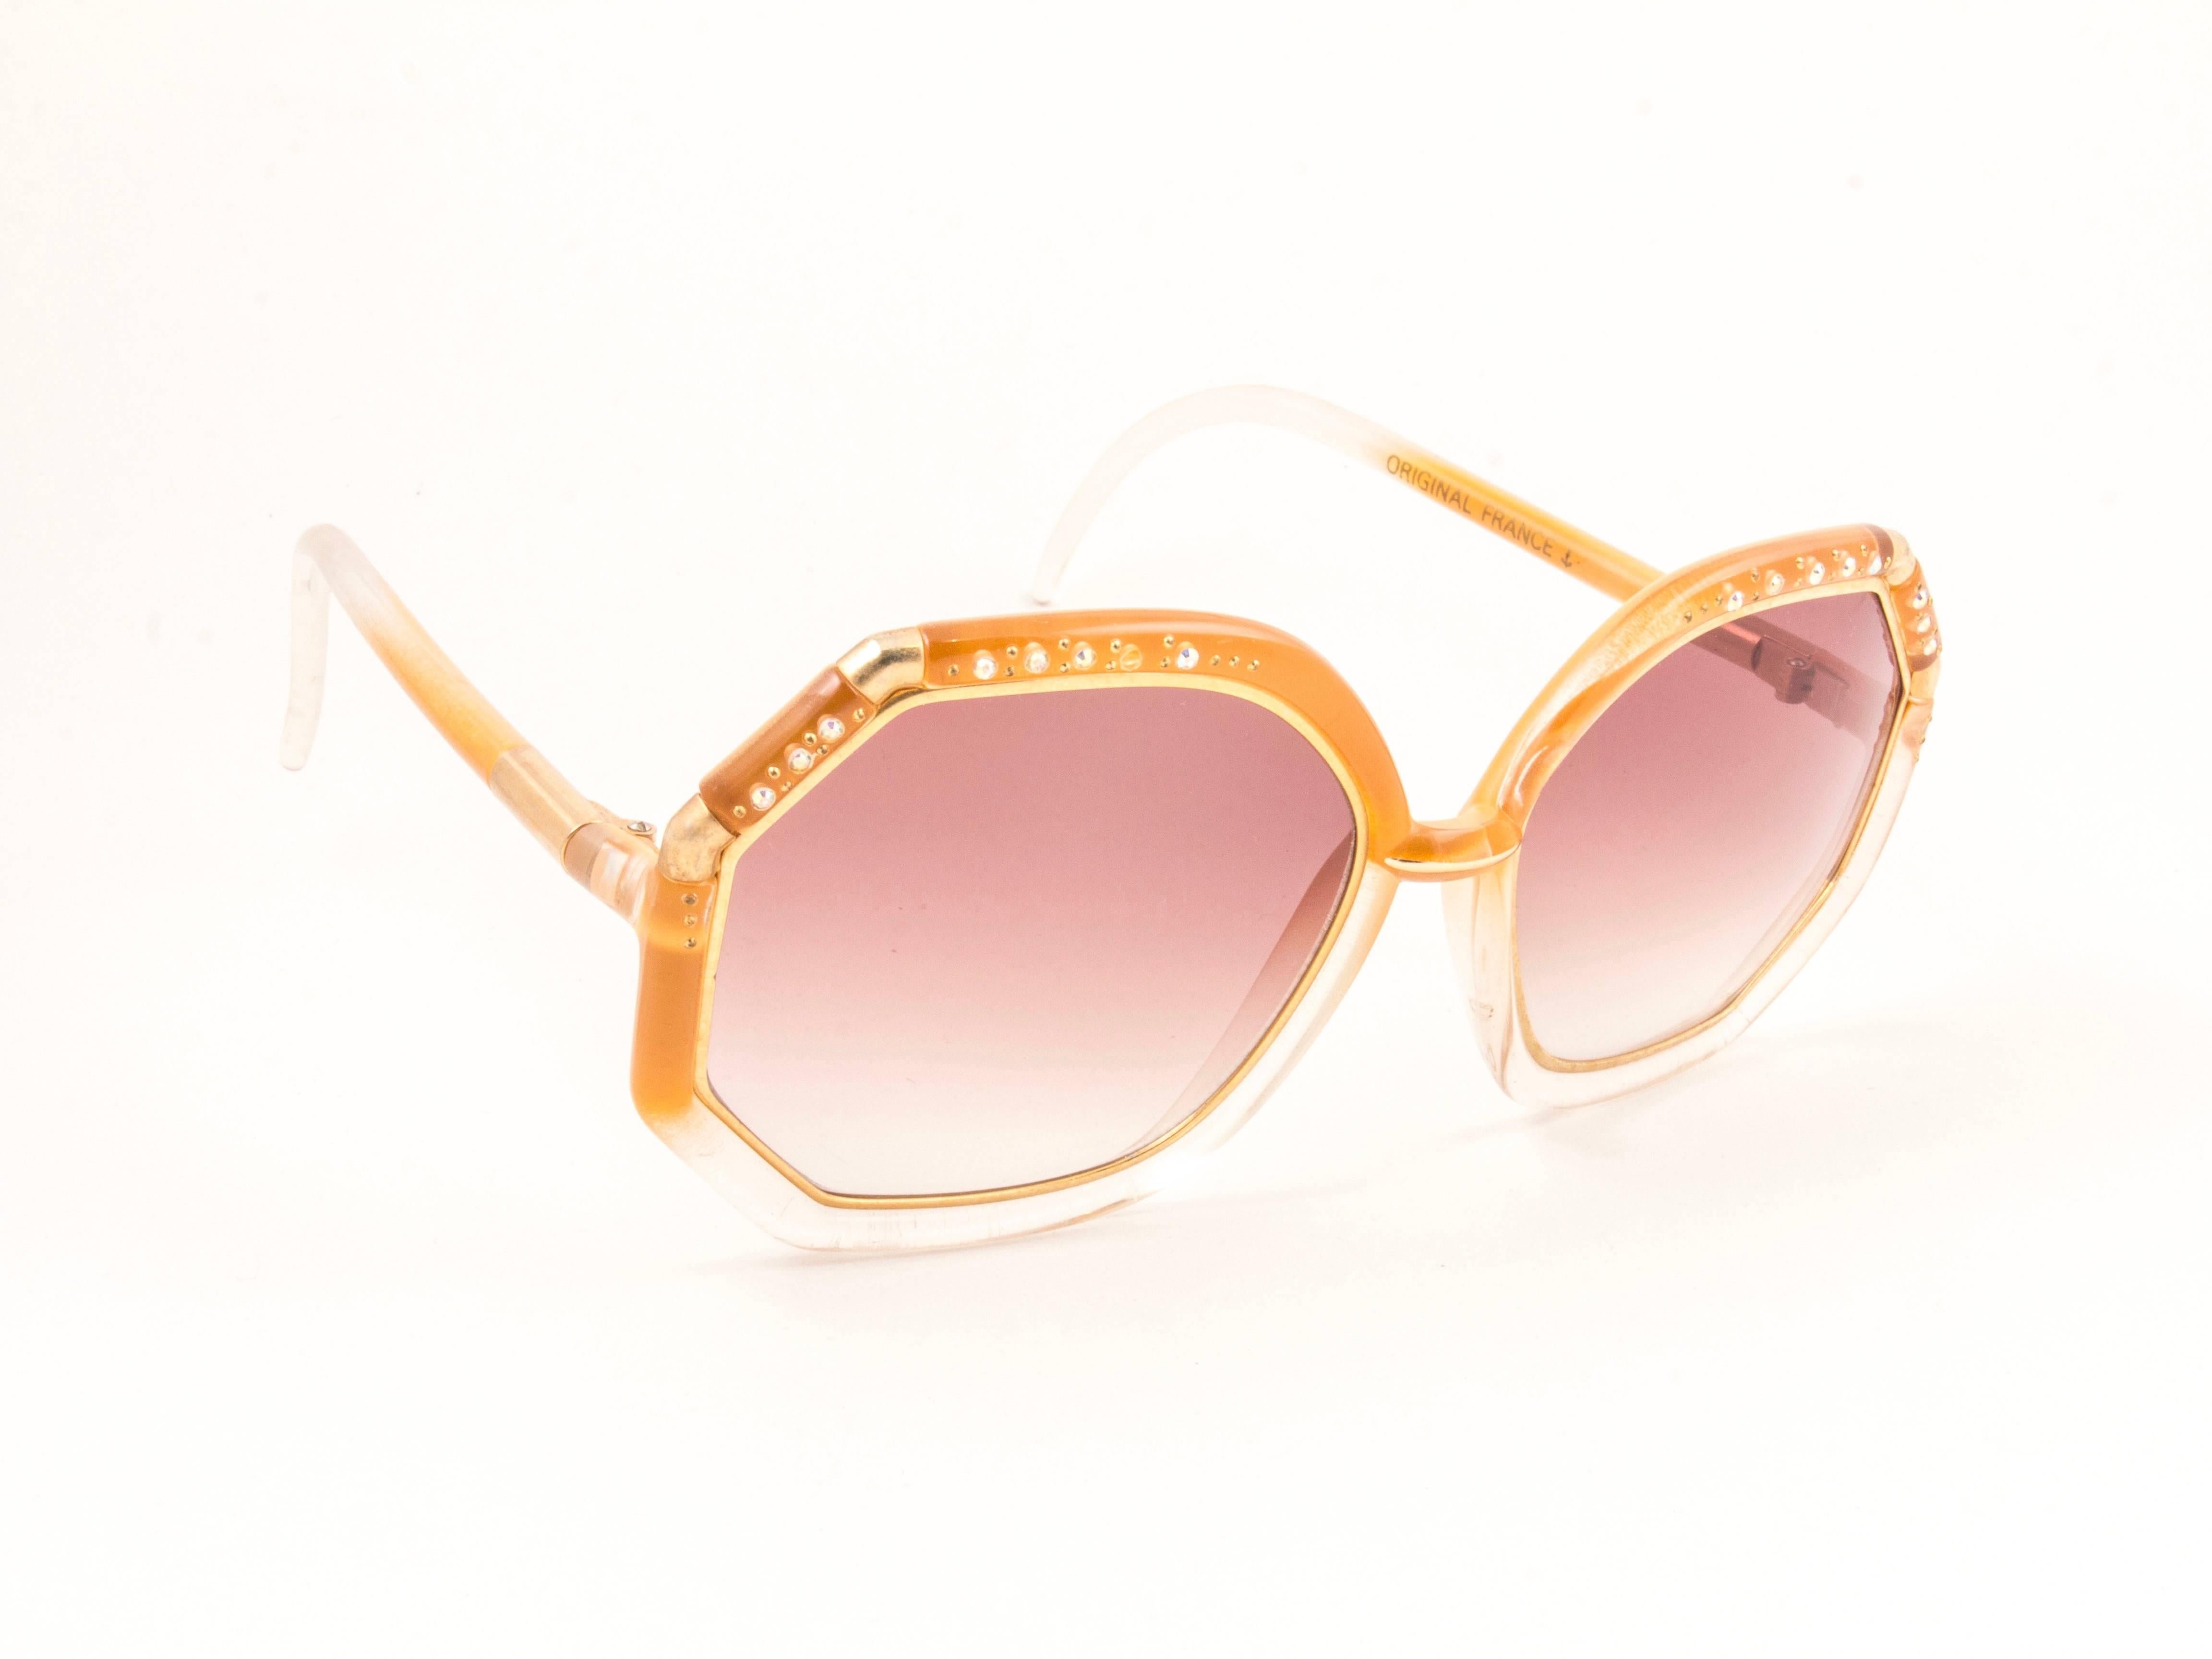 New Vintage Ted Lapidus TL Strass accents over translucent Amber & gold frame with spotless rose gradient lenses.  
Made in Paris.  
Produced and design in 1970's. 
New, never worn or displayed.